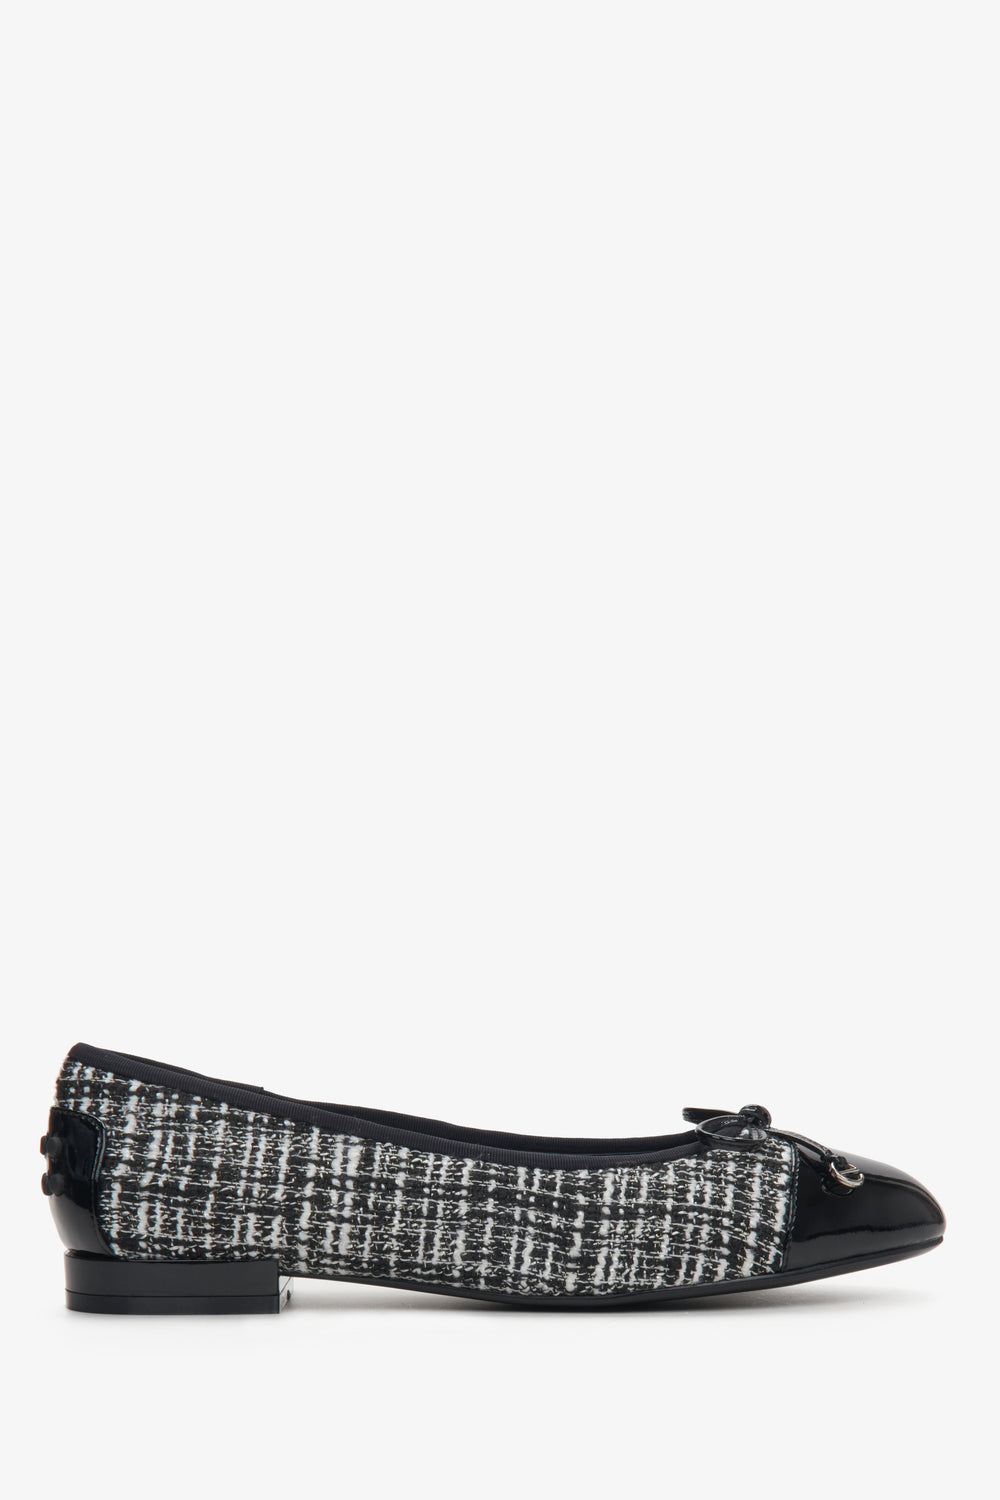 Women's ballet flats in black and white combined materials by Estro - shoe profile.